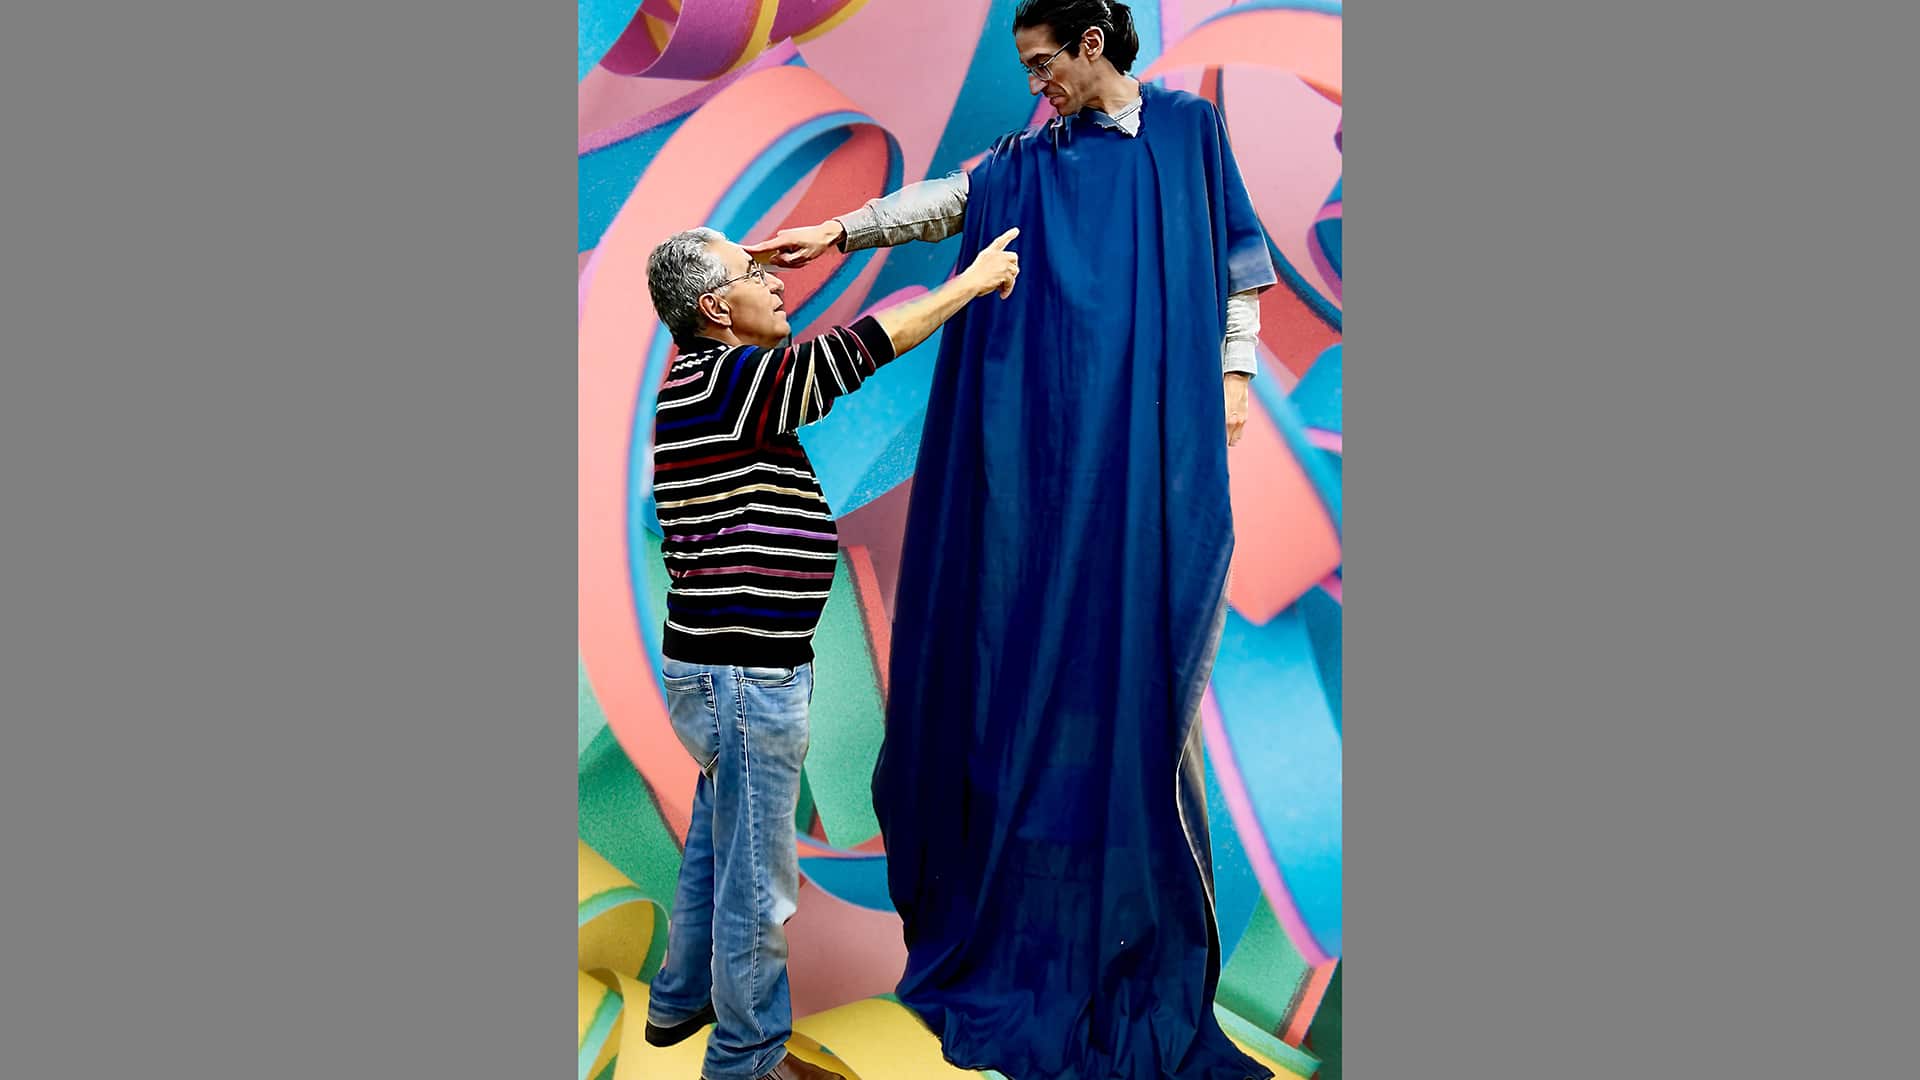 Two figures point at each other. One a man wearing a stripy jumper and jeans, the other much taller, draped in dark blue cloth